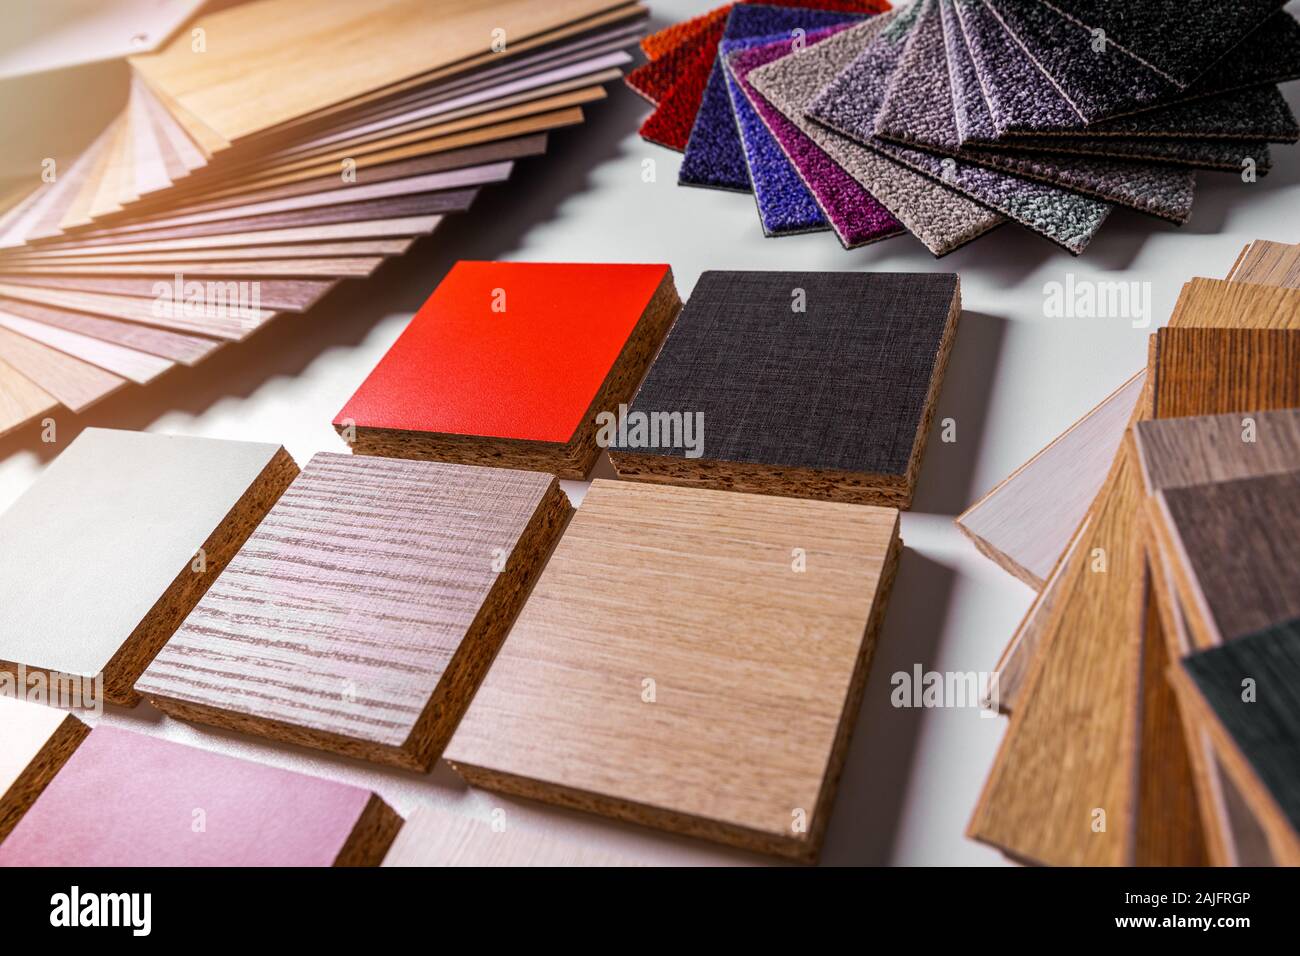 variety of furniture and flooring material design samples Stock Photo